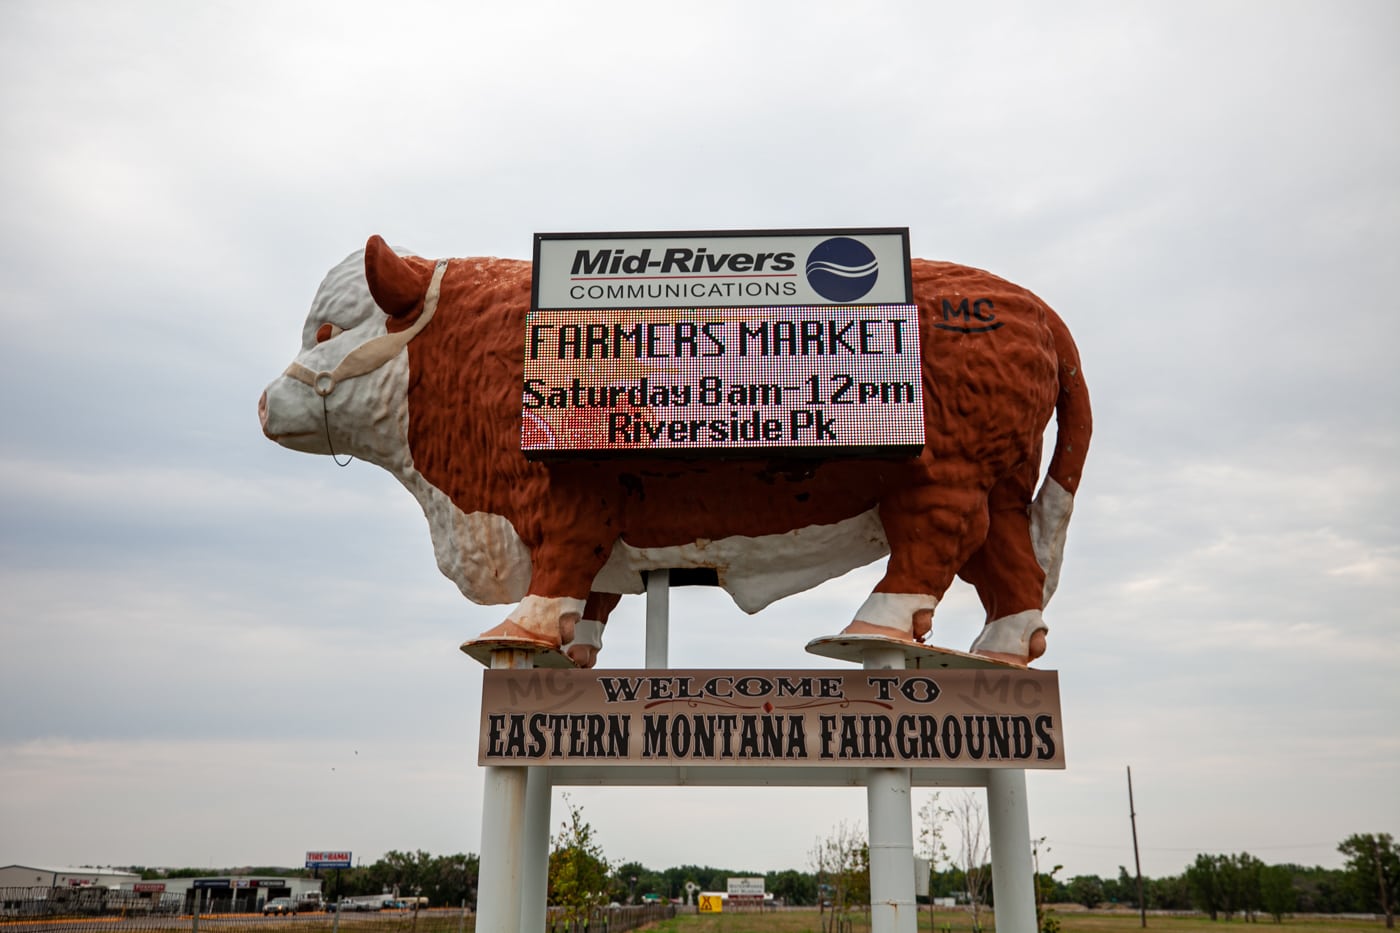 Giant Bull at the Eastern Montana Fairgrounds in Miles City Montana - Montana Roadside Attractions